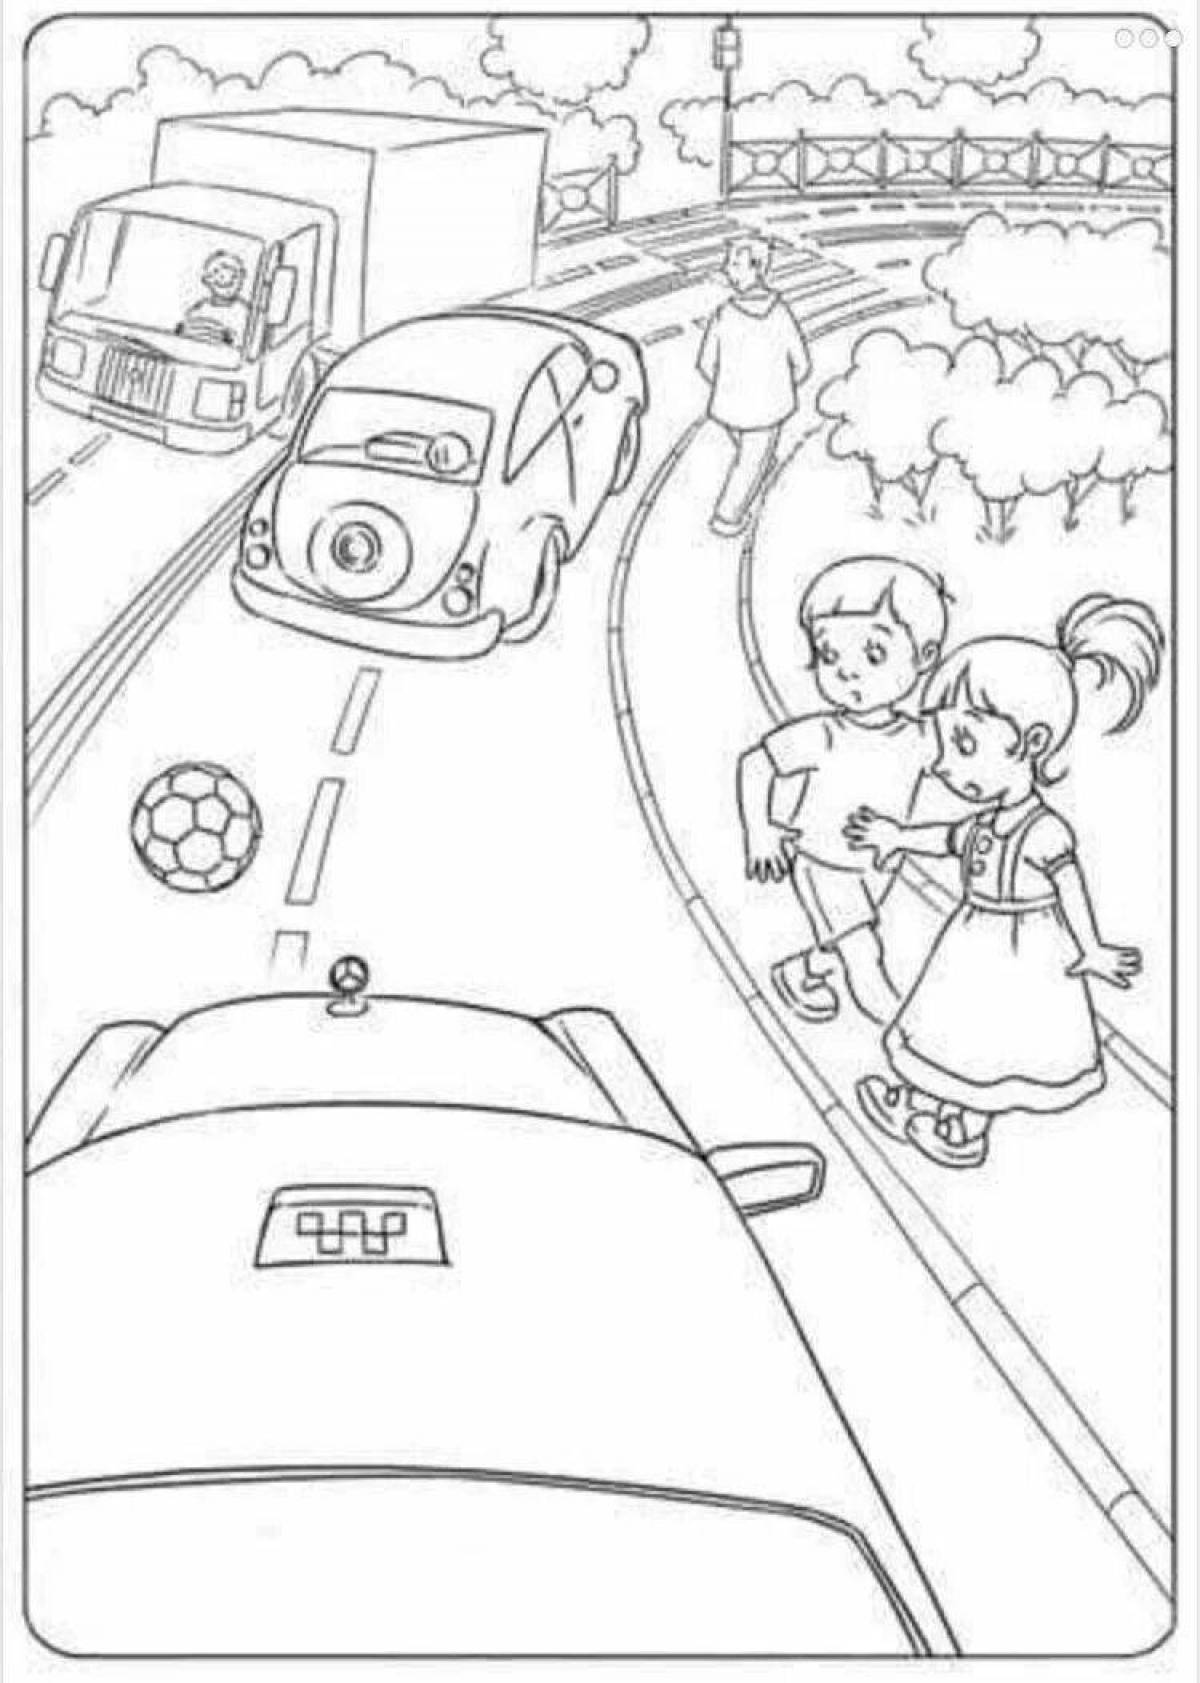 Funny road safety coloring page